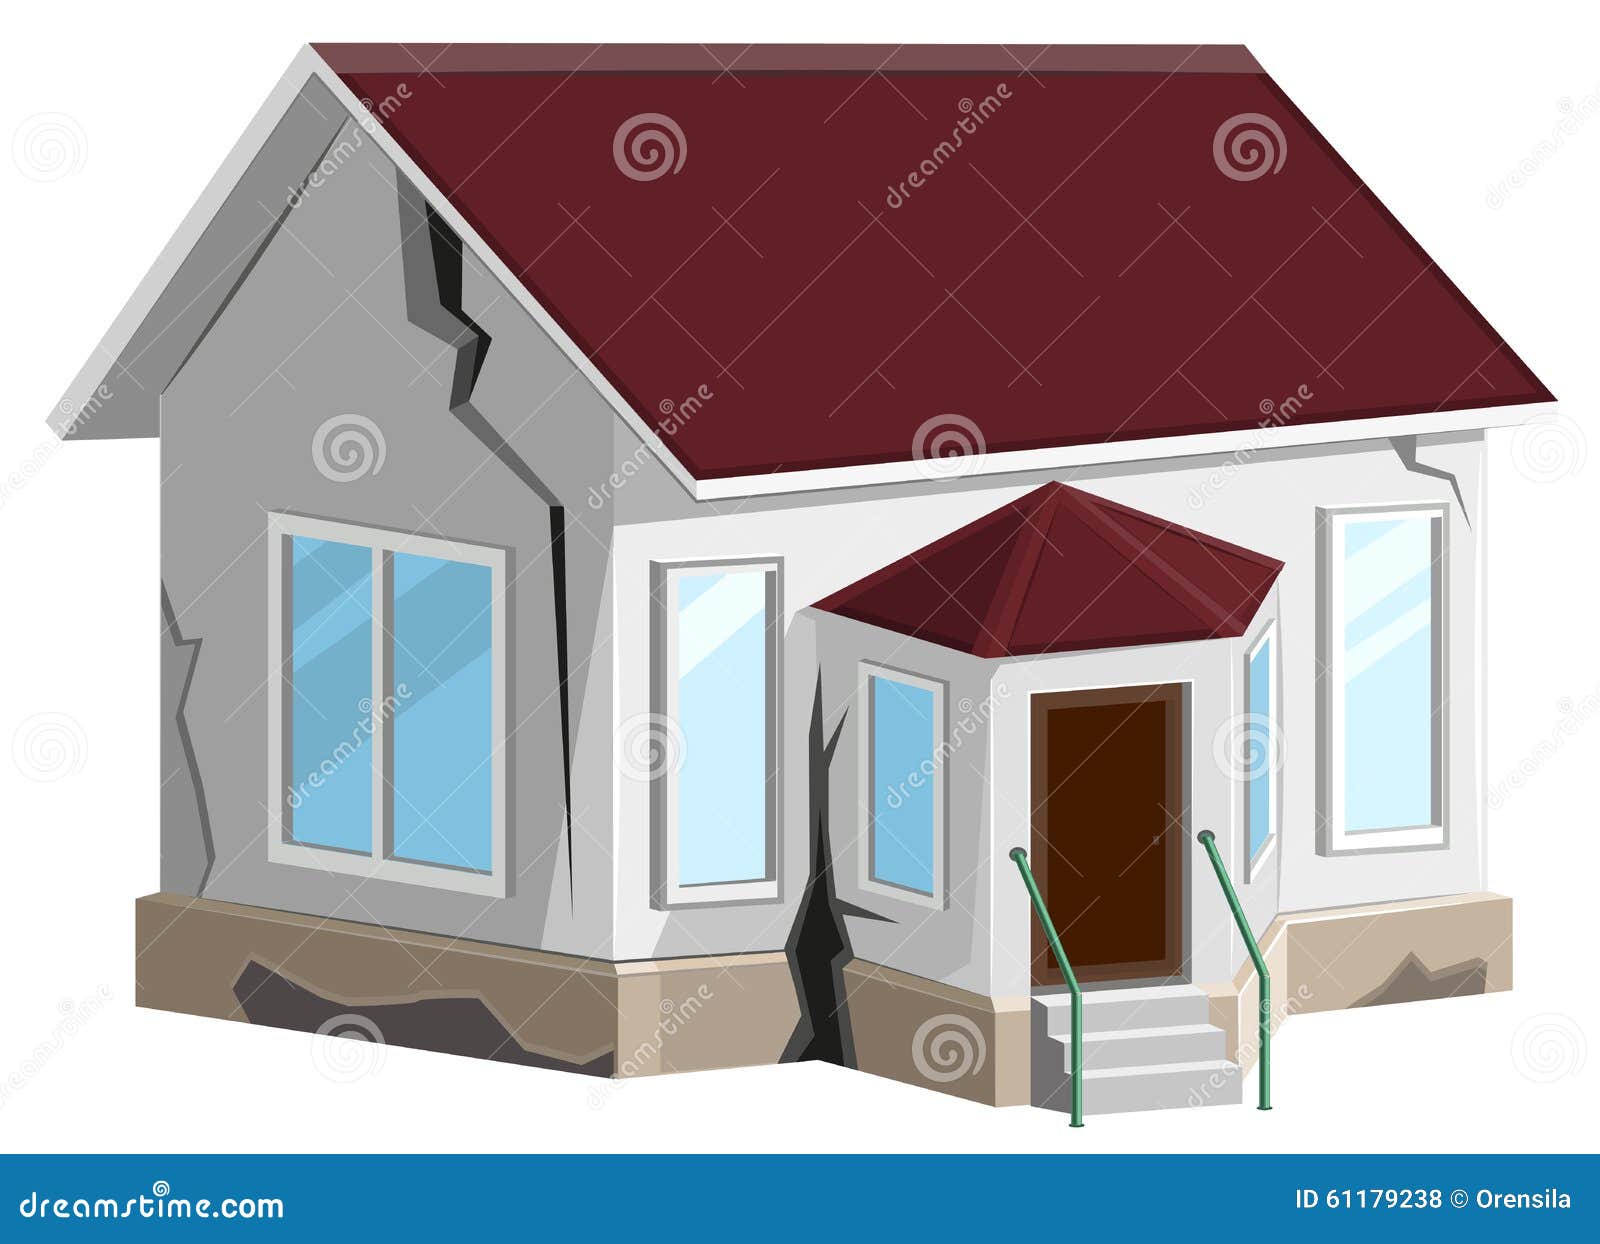 destroyed house clipart - photo #13